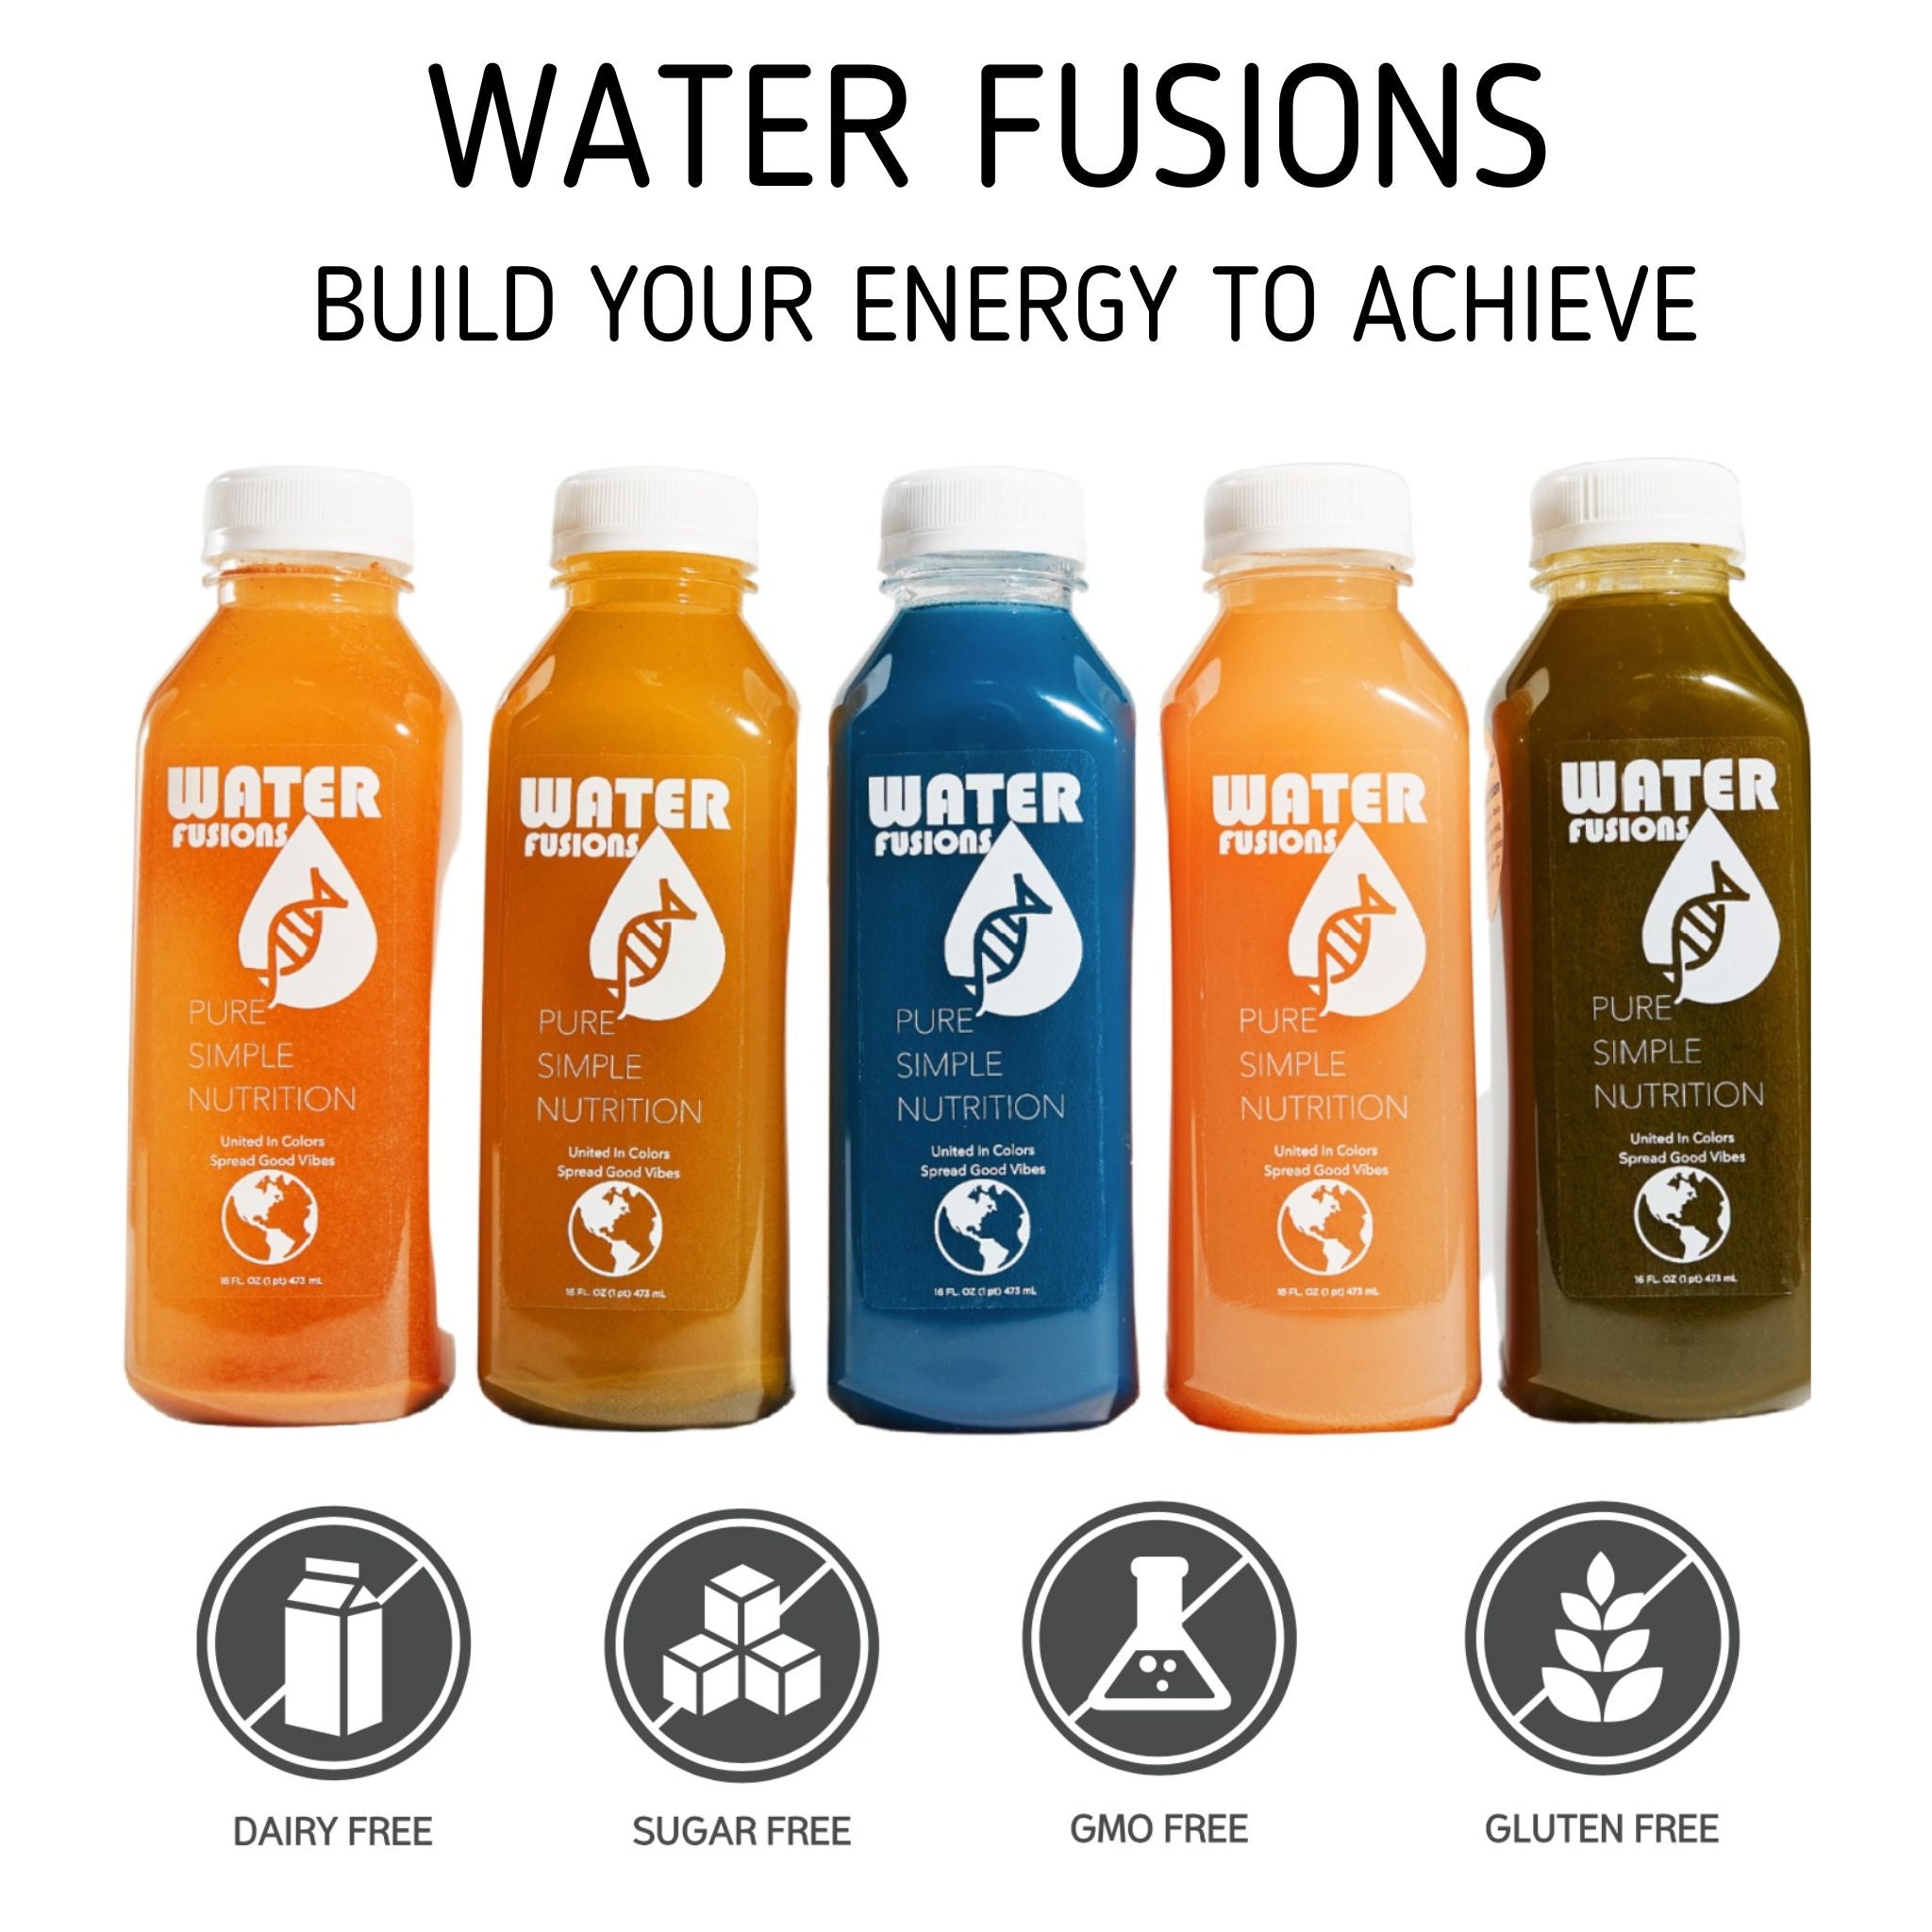 Bio Nutrition Gift - Quantum matches you to alkaline Water Fusions that restore your inner balance in 24hrs.